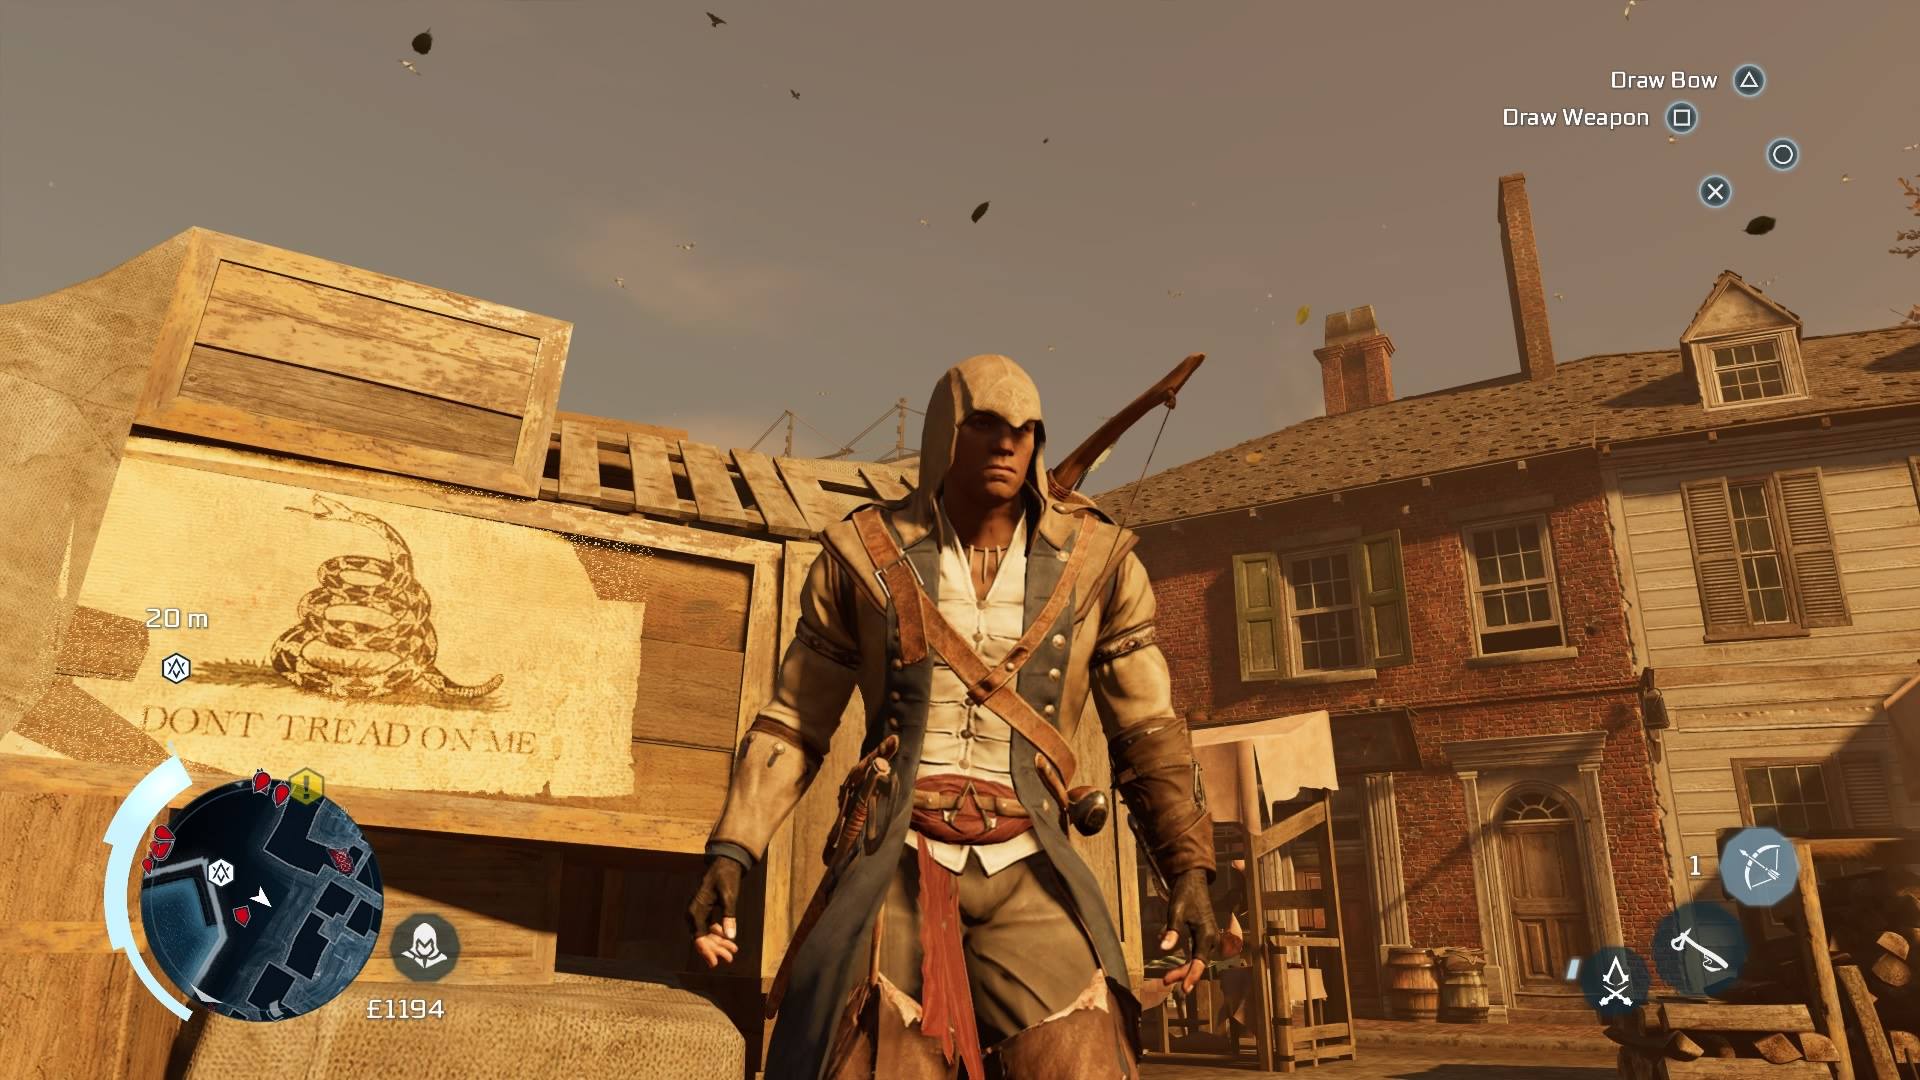 Assassin's Creed III Remastered Review